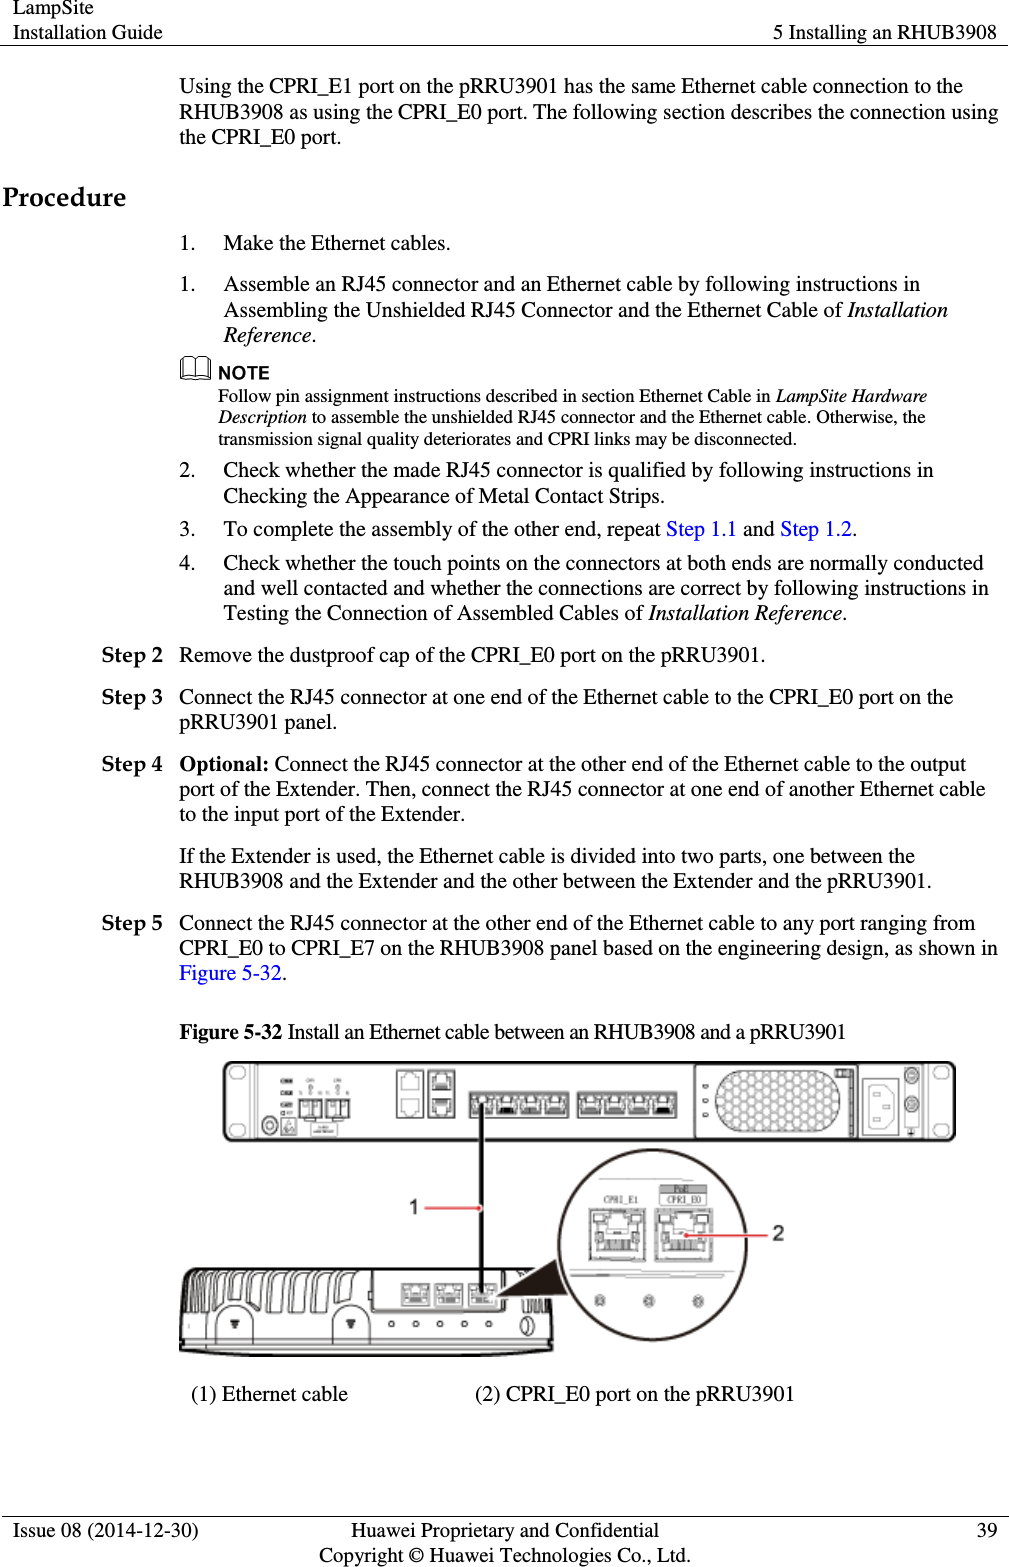 LampSite Installation Guide 5 Installing an RHUB3908  Issue 08 (2014-12-30) Huawei Proprietary and Confidential                                     Copyright © Huawei Technologies Co., Ltd. 39  Using the CPRI_E1 port on the pRRU3901 has the same Ethernet cable connection to the RHUB3908 as using the CPRI_E0 port. The following section describes the connection using the CPRI_E0 port. Procedure 1. Make the Ethernet cables. 1. Assemble an RJ45 connector and an Ethernet cable by following instructions in Assembling the Unshielded RJ45 Connector and the Ethernet Cable of Installation Reference.  Follow pin assignment instructions described in section Ethernet Cable in LampSite Hardware Description to assemble the unshielded RJ45 connector and the Ethernet cable. Otherwise, the transmission signal quality deteriorates and CPRI links may be disconnected. 2. Check whether the made RJ45 connector is qualified by following instructions in Checking the Appearance of Metal Contact Strips. 3. To complete the assembly of the other end, repeat Step 1.1 and Step 1.2. 4. Check whether the touch points on the connectors at both ends are normally conducted and well contacted and whether the connections are correct by following instructions in Testing the Connection of Assembled Cables of Installation Reference. Step 2 Remove the dustproof cap of the CPRI_E0 port on the pRRU3901. Step 3 Connect the RJ45 connector at one end of the Ethernet cable to the CPRI_E0 port on the pRRU3901 panel. Step 4 Optional: Connect the RJ45 connector at the other end of the Ethernet cable to the output port of the Extender. Then, connect the RJ45 connector at one end of another Ethernet cable to the input port of the Extender. If the Extender is used, the Ethernet cable is divided into two parts, one between the RHUB3908 and the Extender and the other between the Extender and the pRRU3901. Step 5 Connect the RJ45 connector at the other end of the Ethernet cable to any port ranging from CPRI_E0 to CPRI_E7 on the RHUB3908 panel based on the engineering design, as shown in Figure 5-32.   Figure 5-32 Install an Ethernet cable between an RHUB3908 and a pRRU3901  (1) Ethernet cable (2) CPRI_E0 port on the pRRU3901 